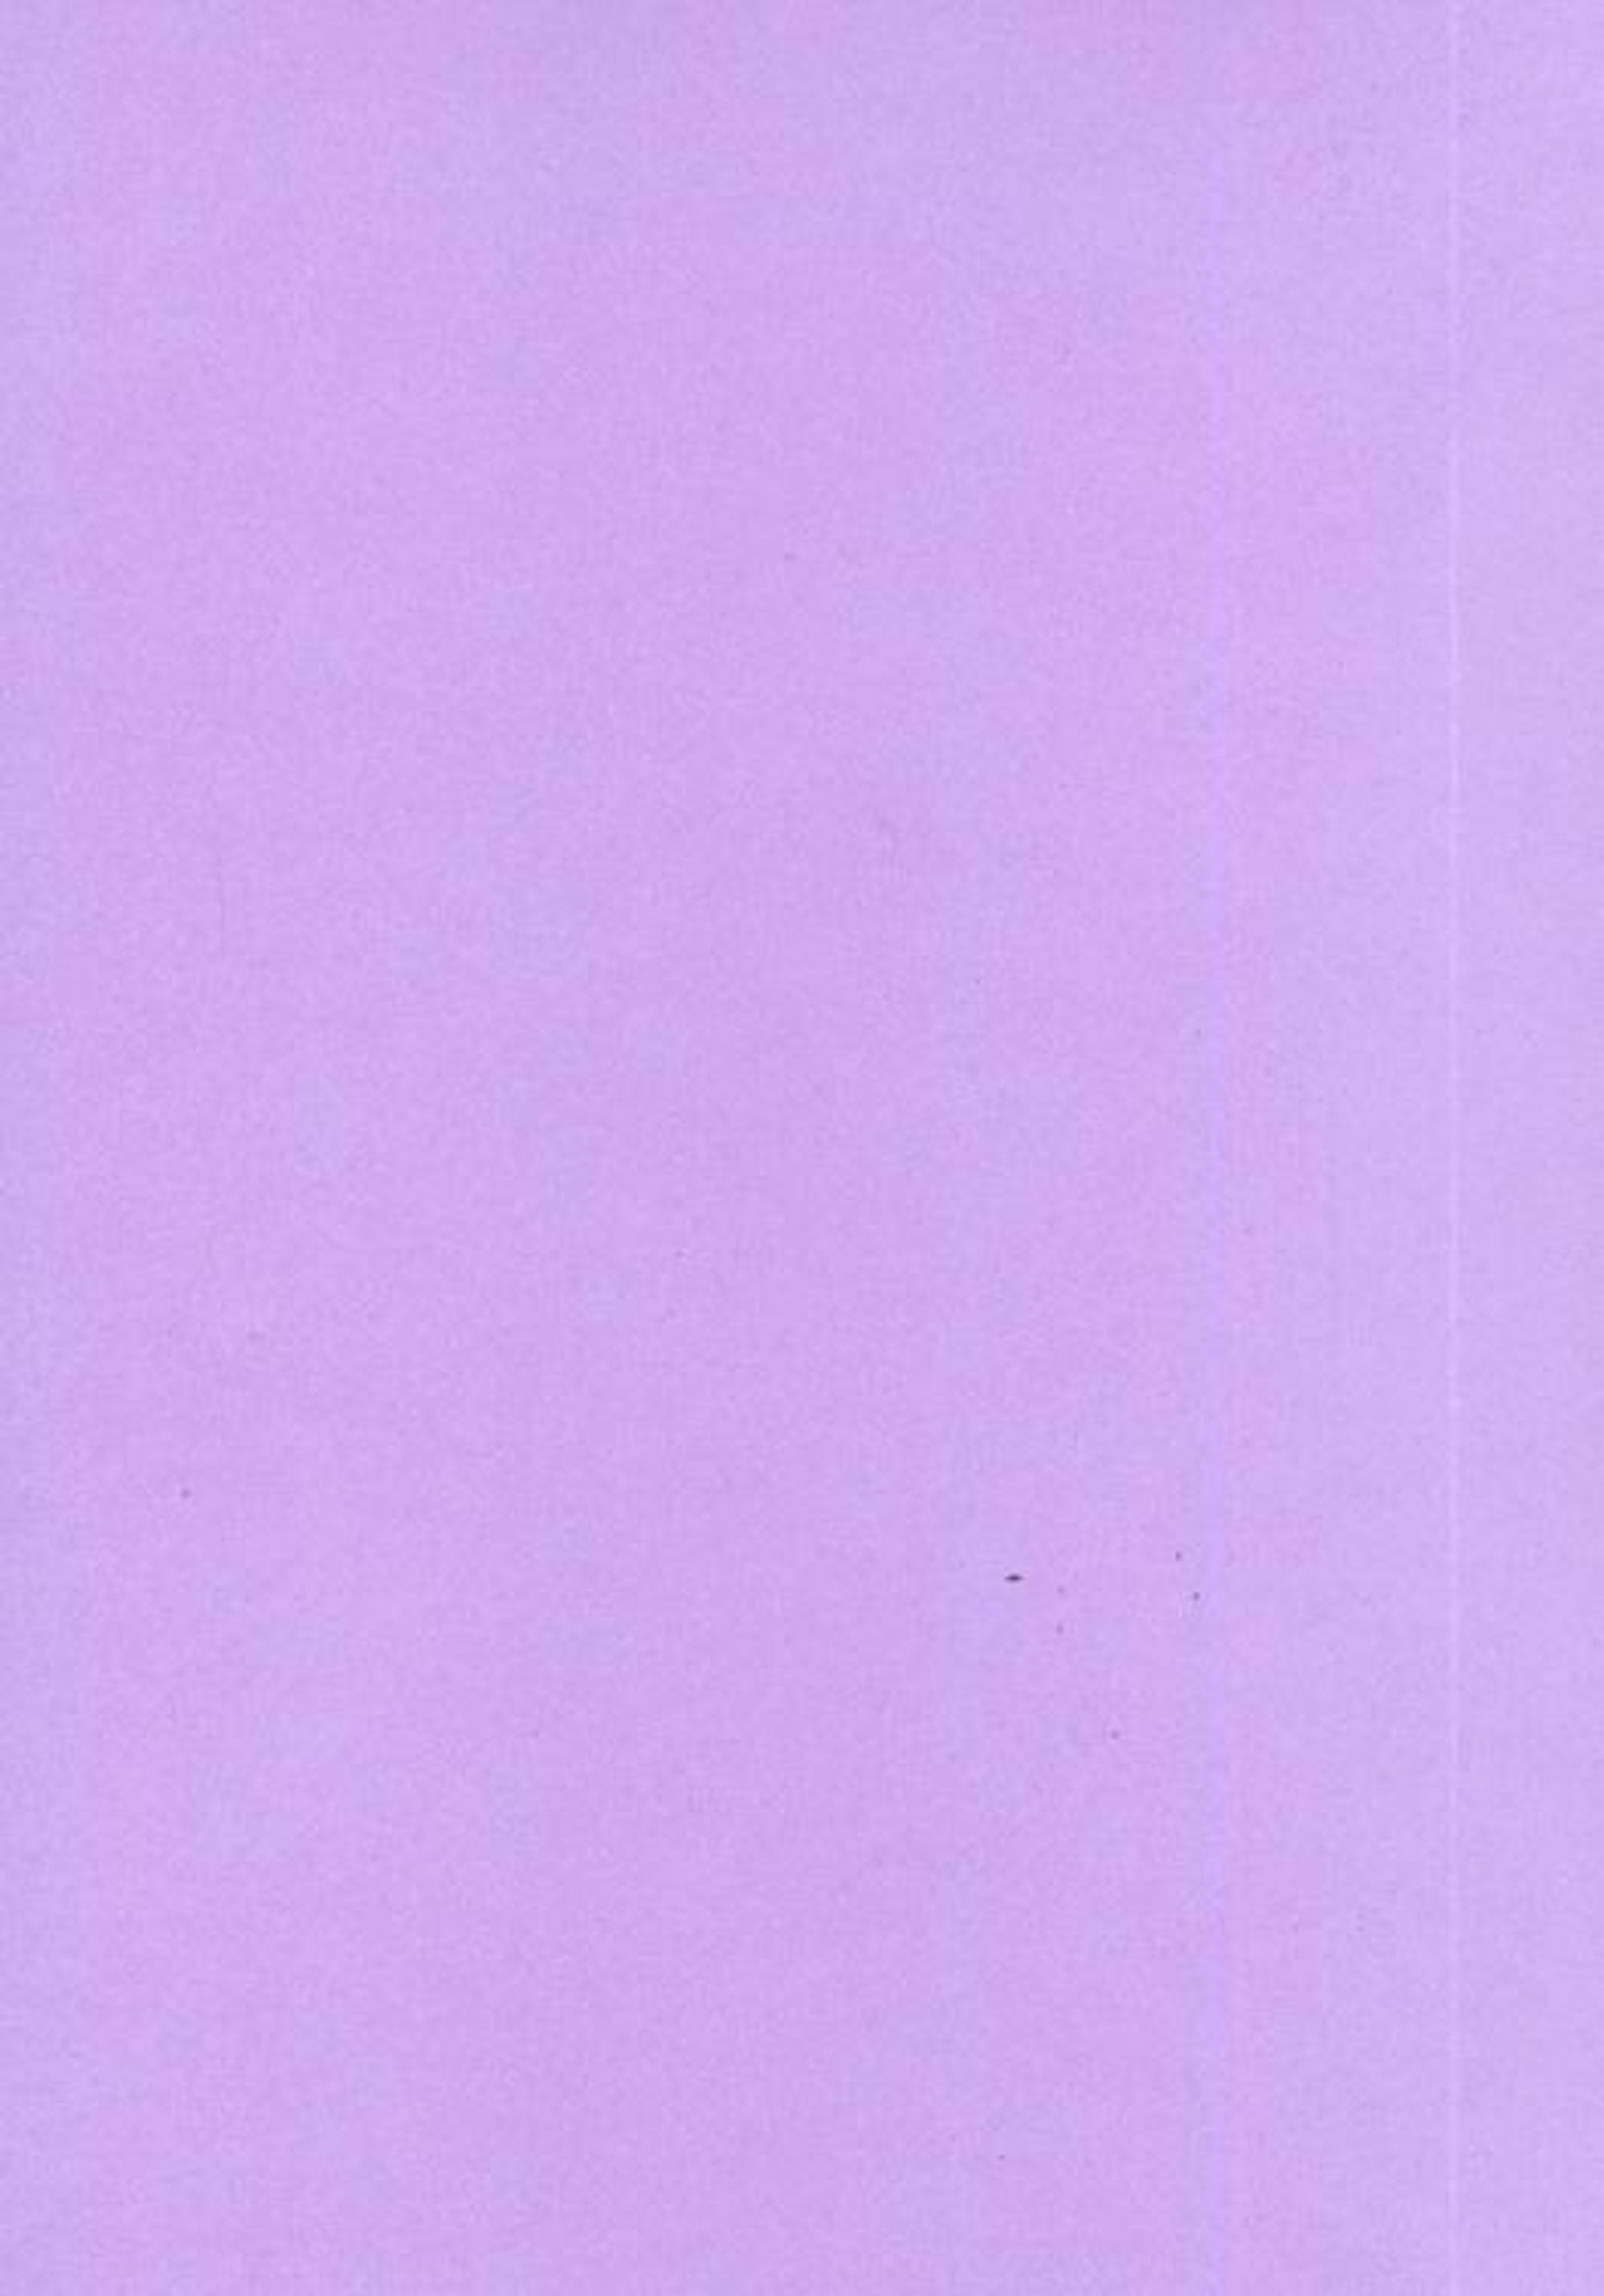 ColorPlan 100lb Cover Solid Cardstock 12X12 10/Pkg-White Frost -  855697009061